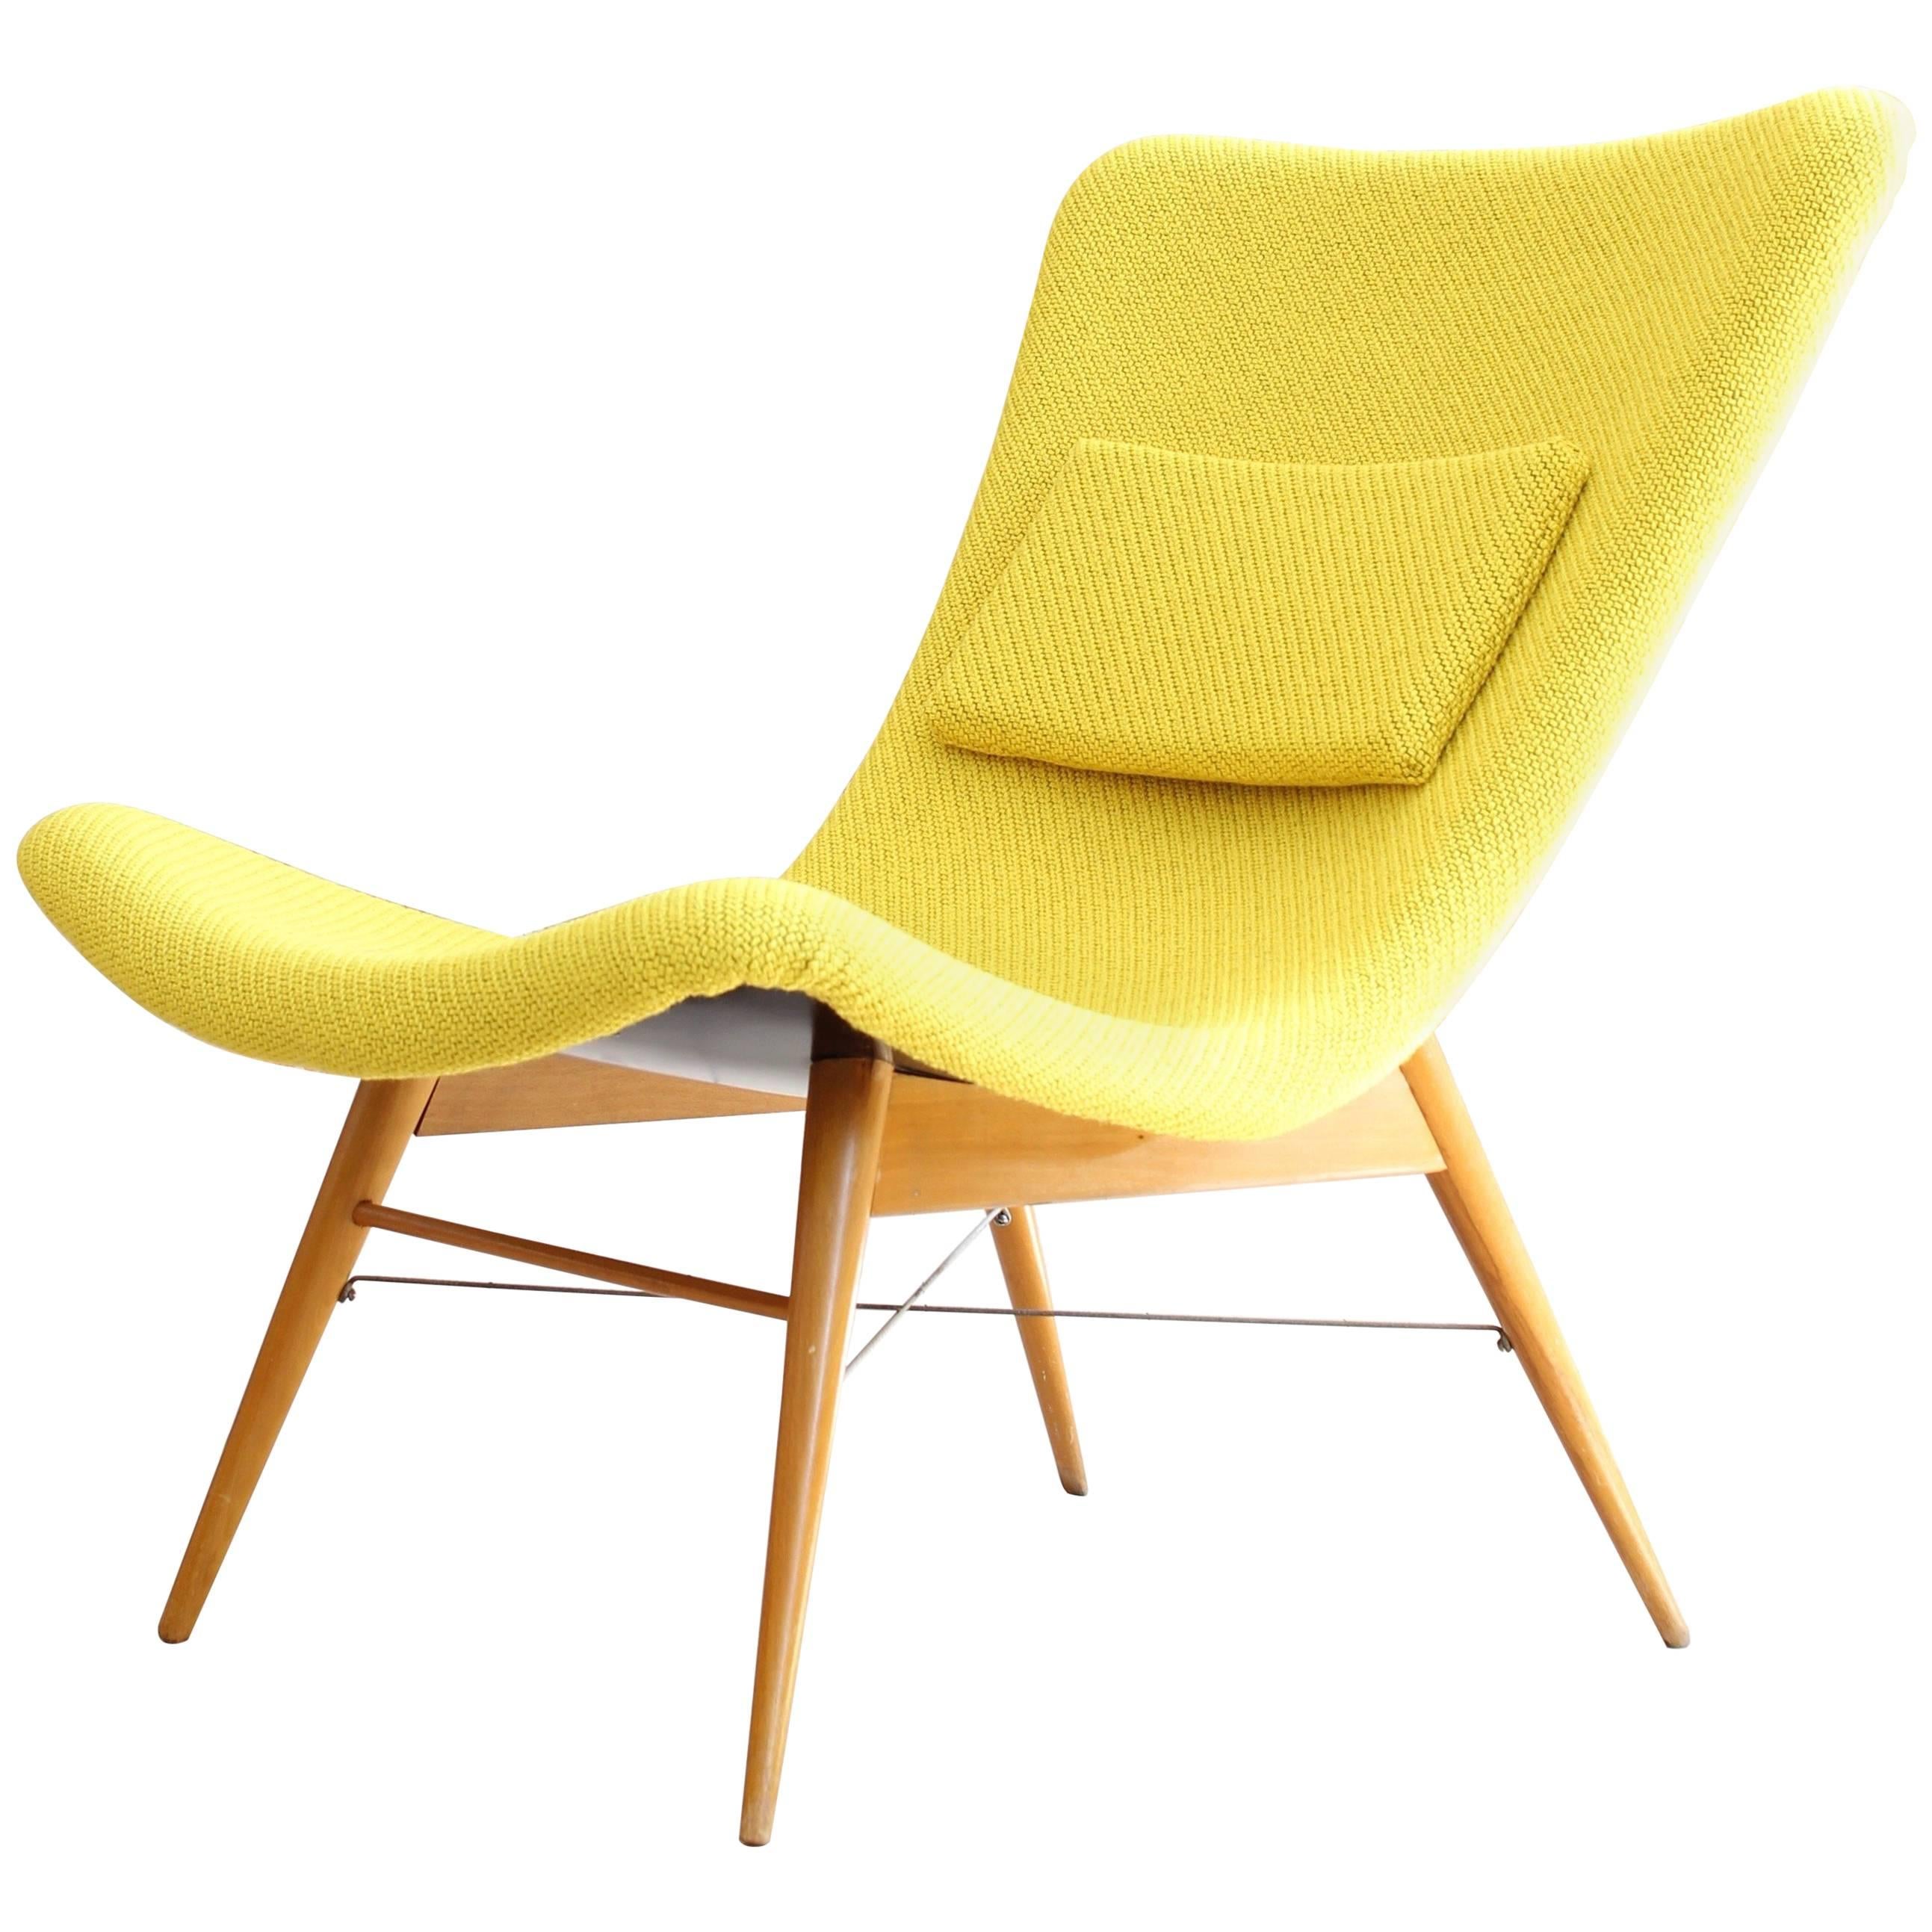 Lounge Chair by Miroslav Navratil, 1959, Reupholstered in Yellow Kvadrat Fabric